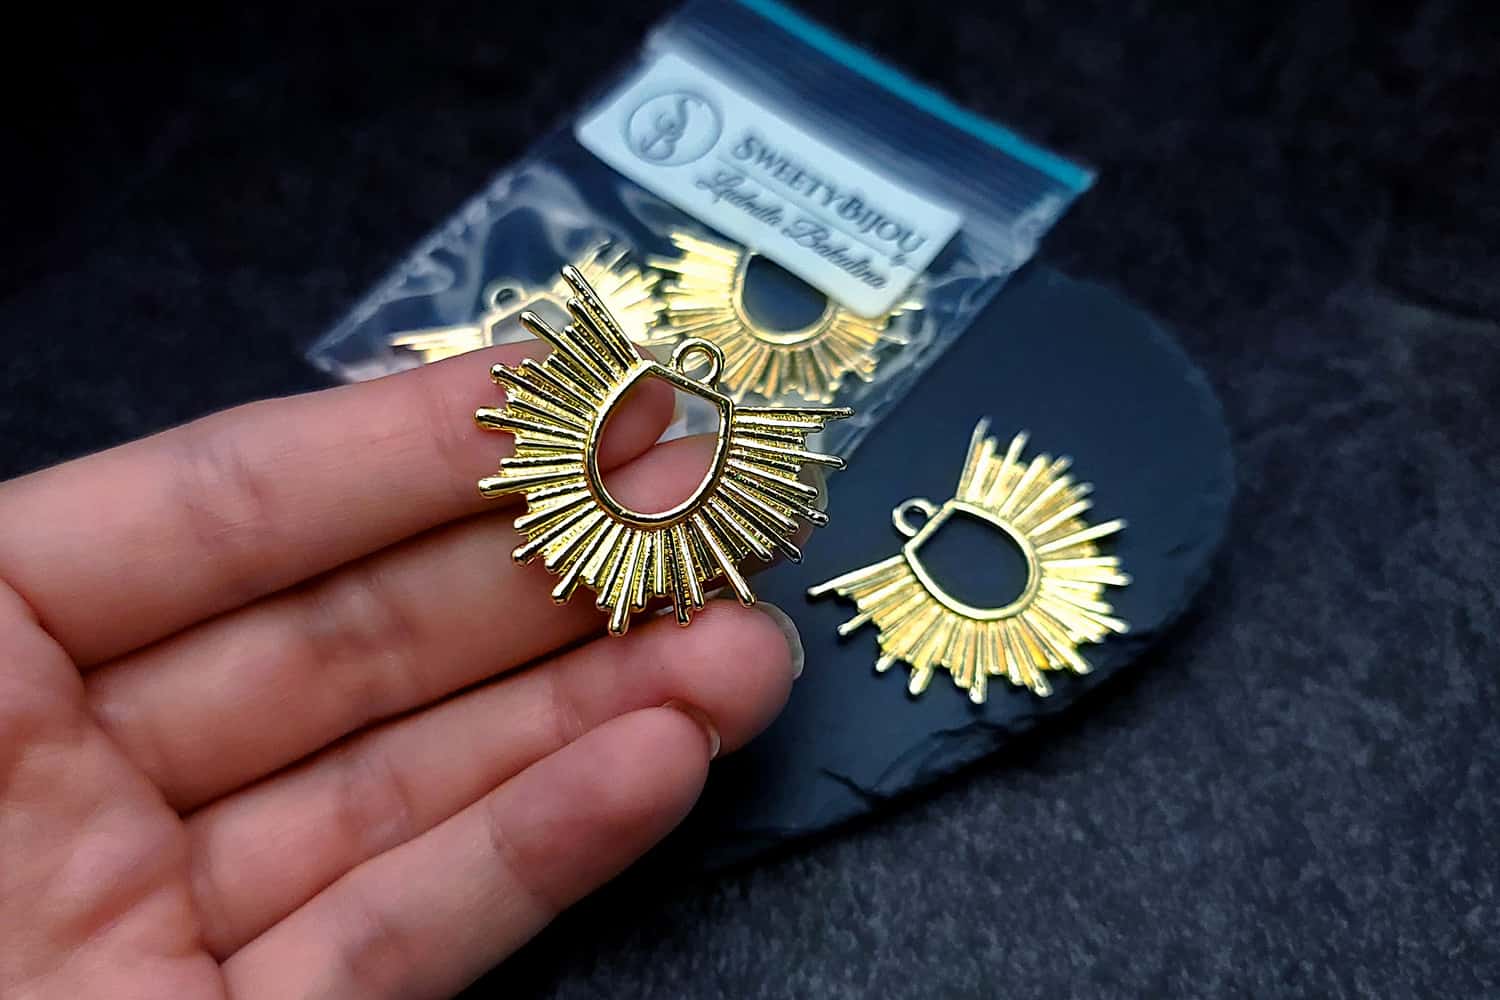 Pair of golden color half-sun charms for earrings (27254)